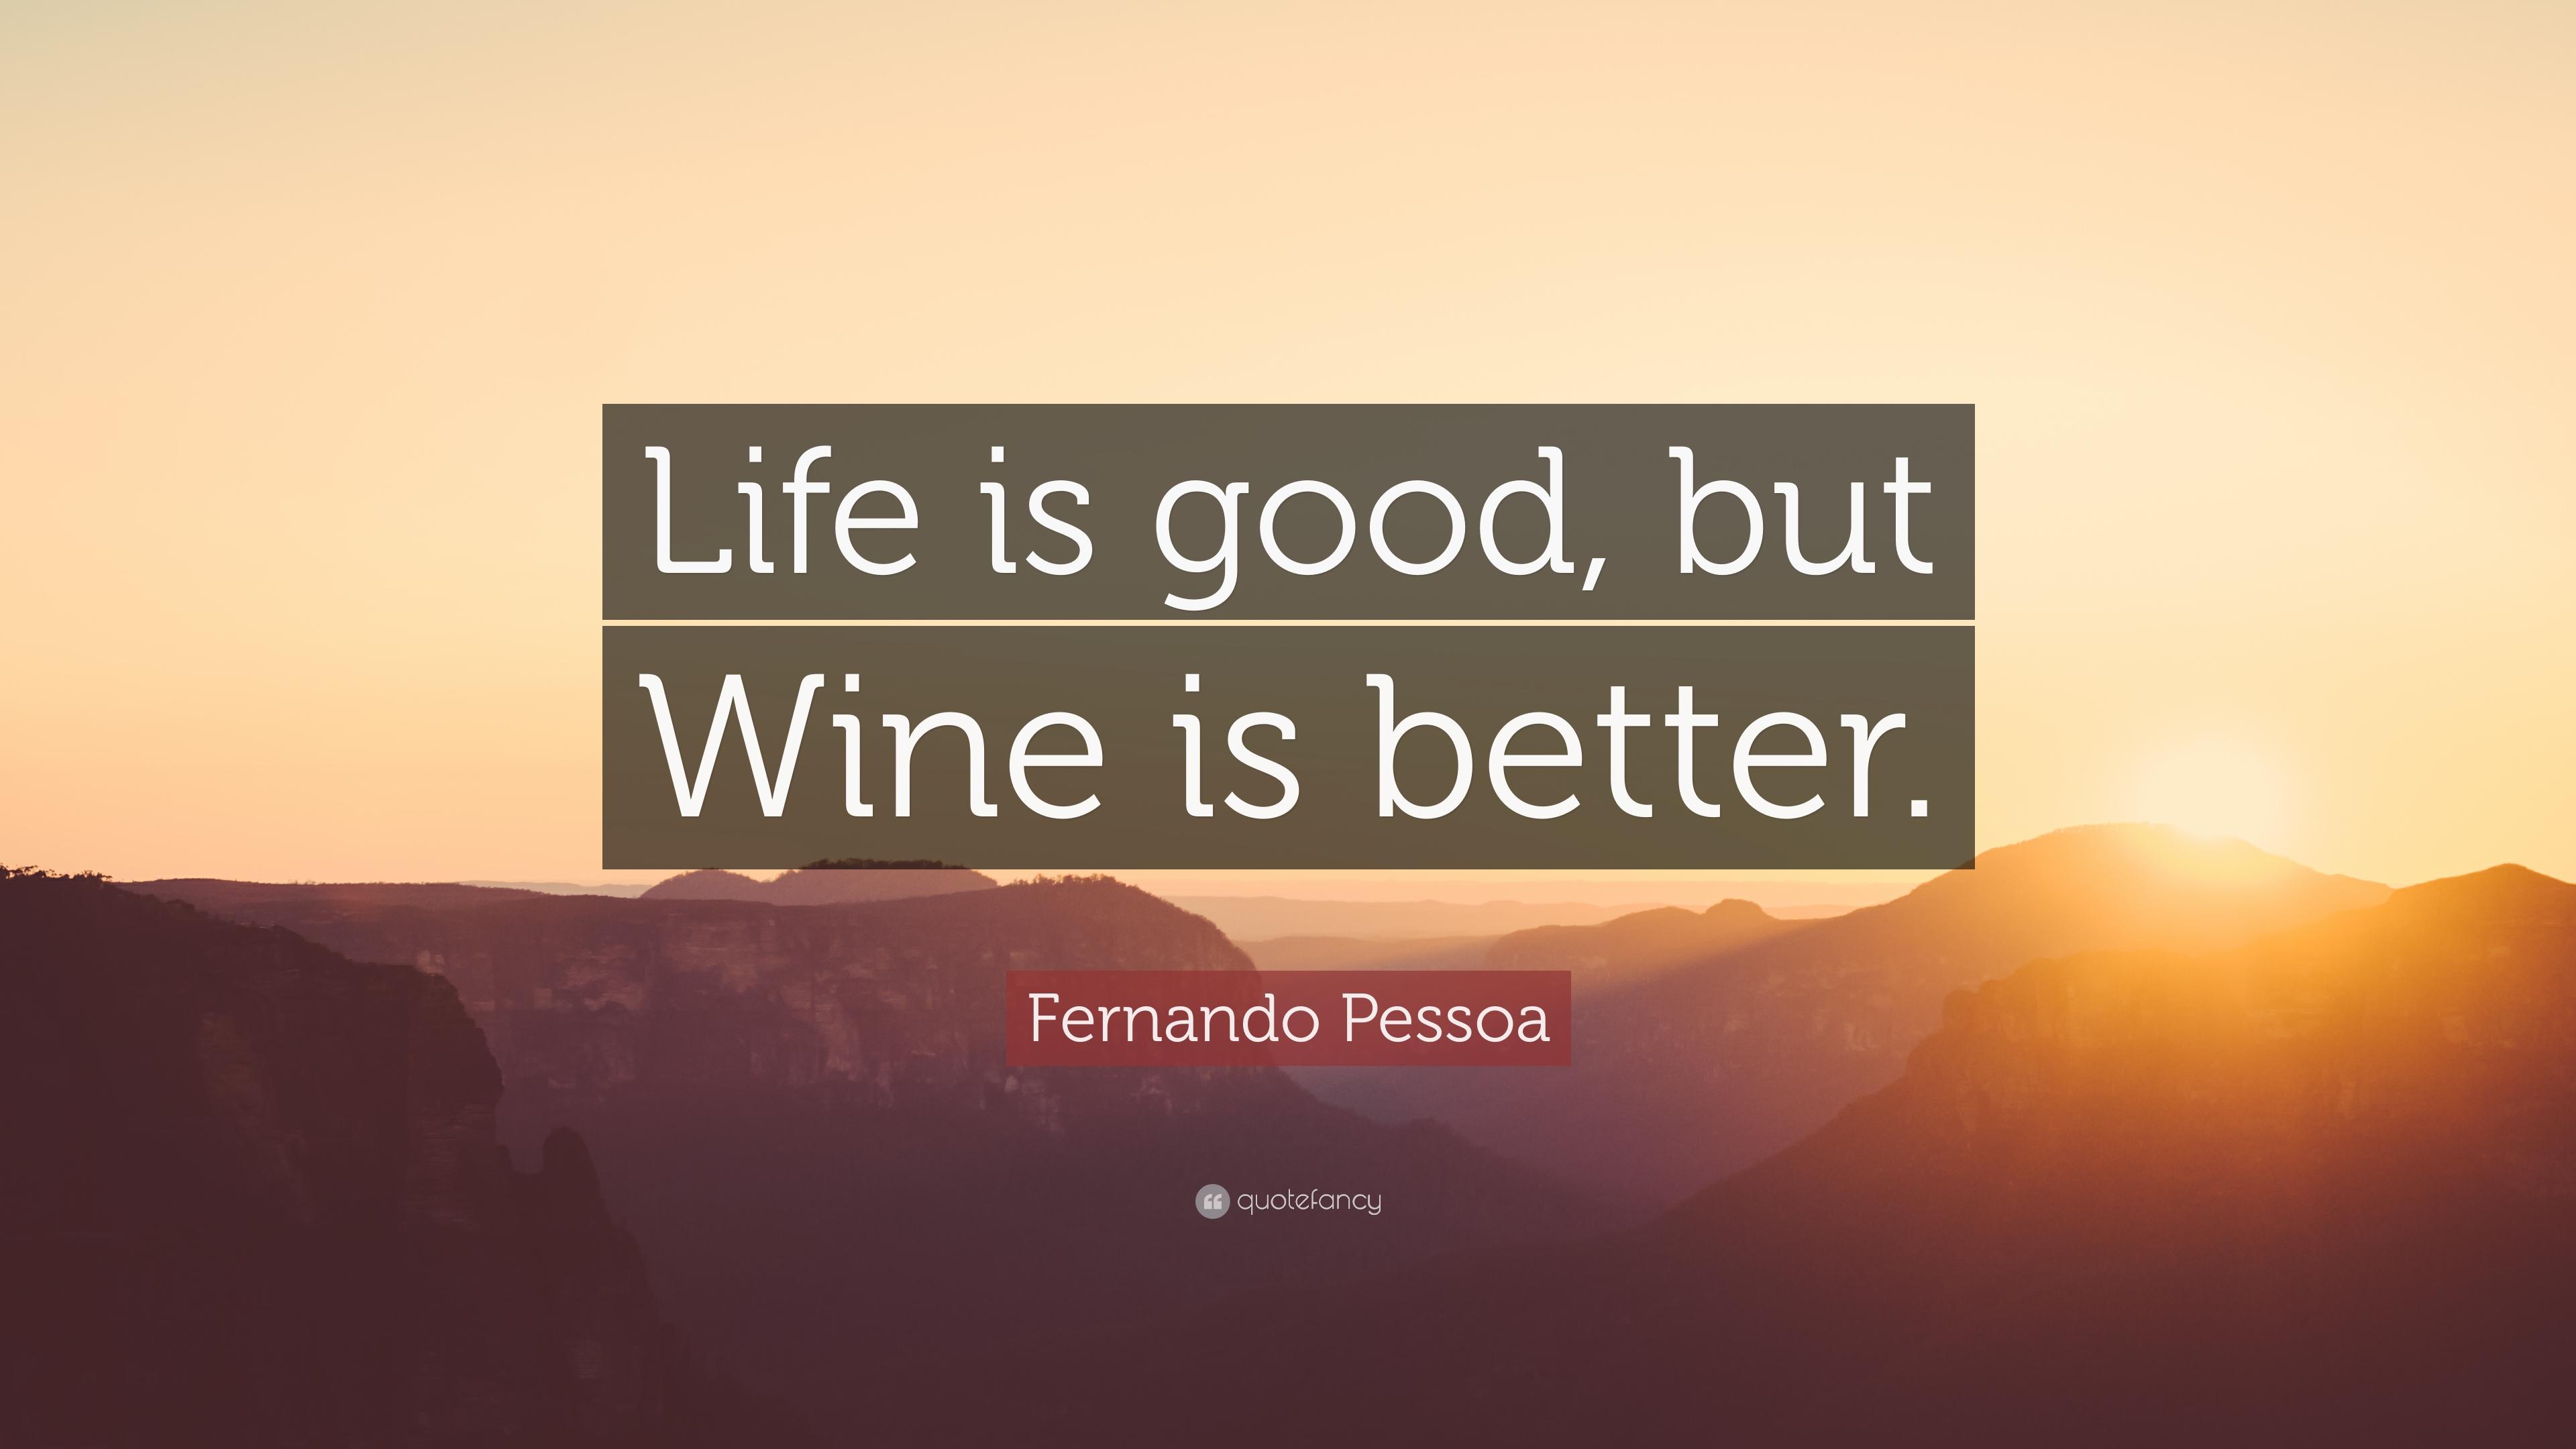 Fernando Pessoa Quote: “Life is good, but Wine is better.” 12